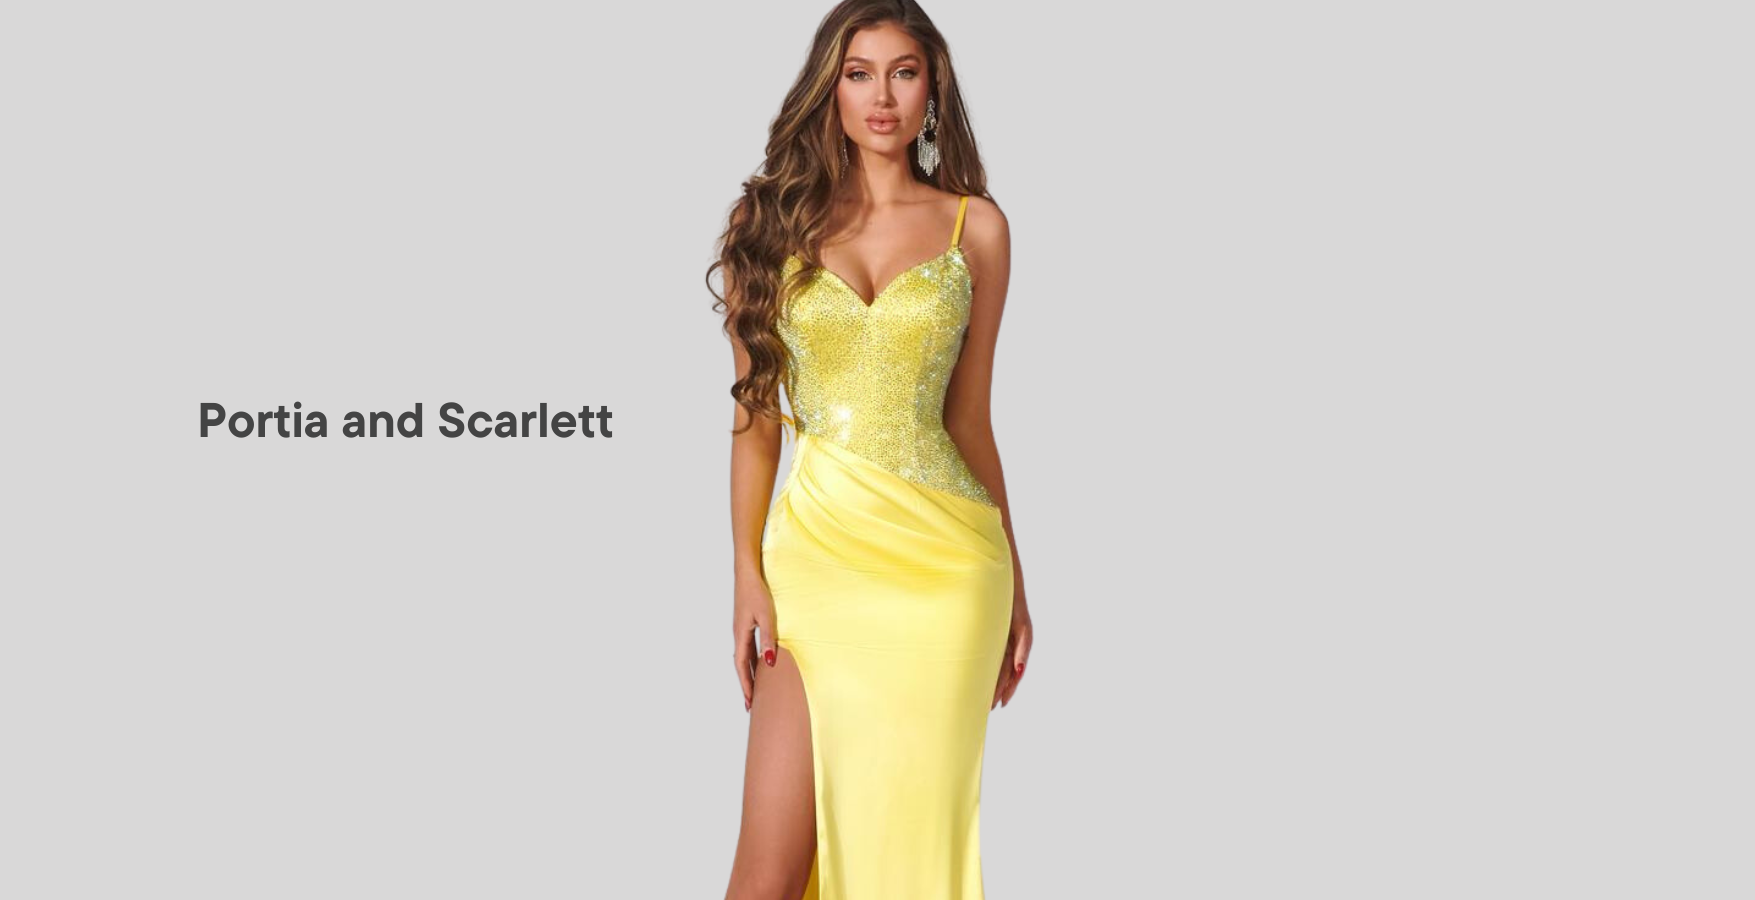 female wearing yellow satin prom dress with text 'Portia and Scarlett' on the left